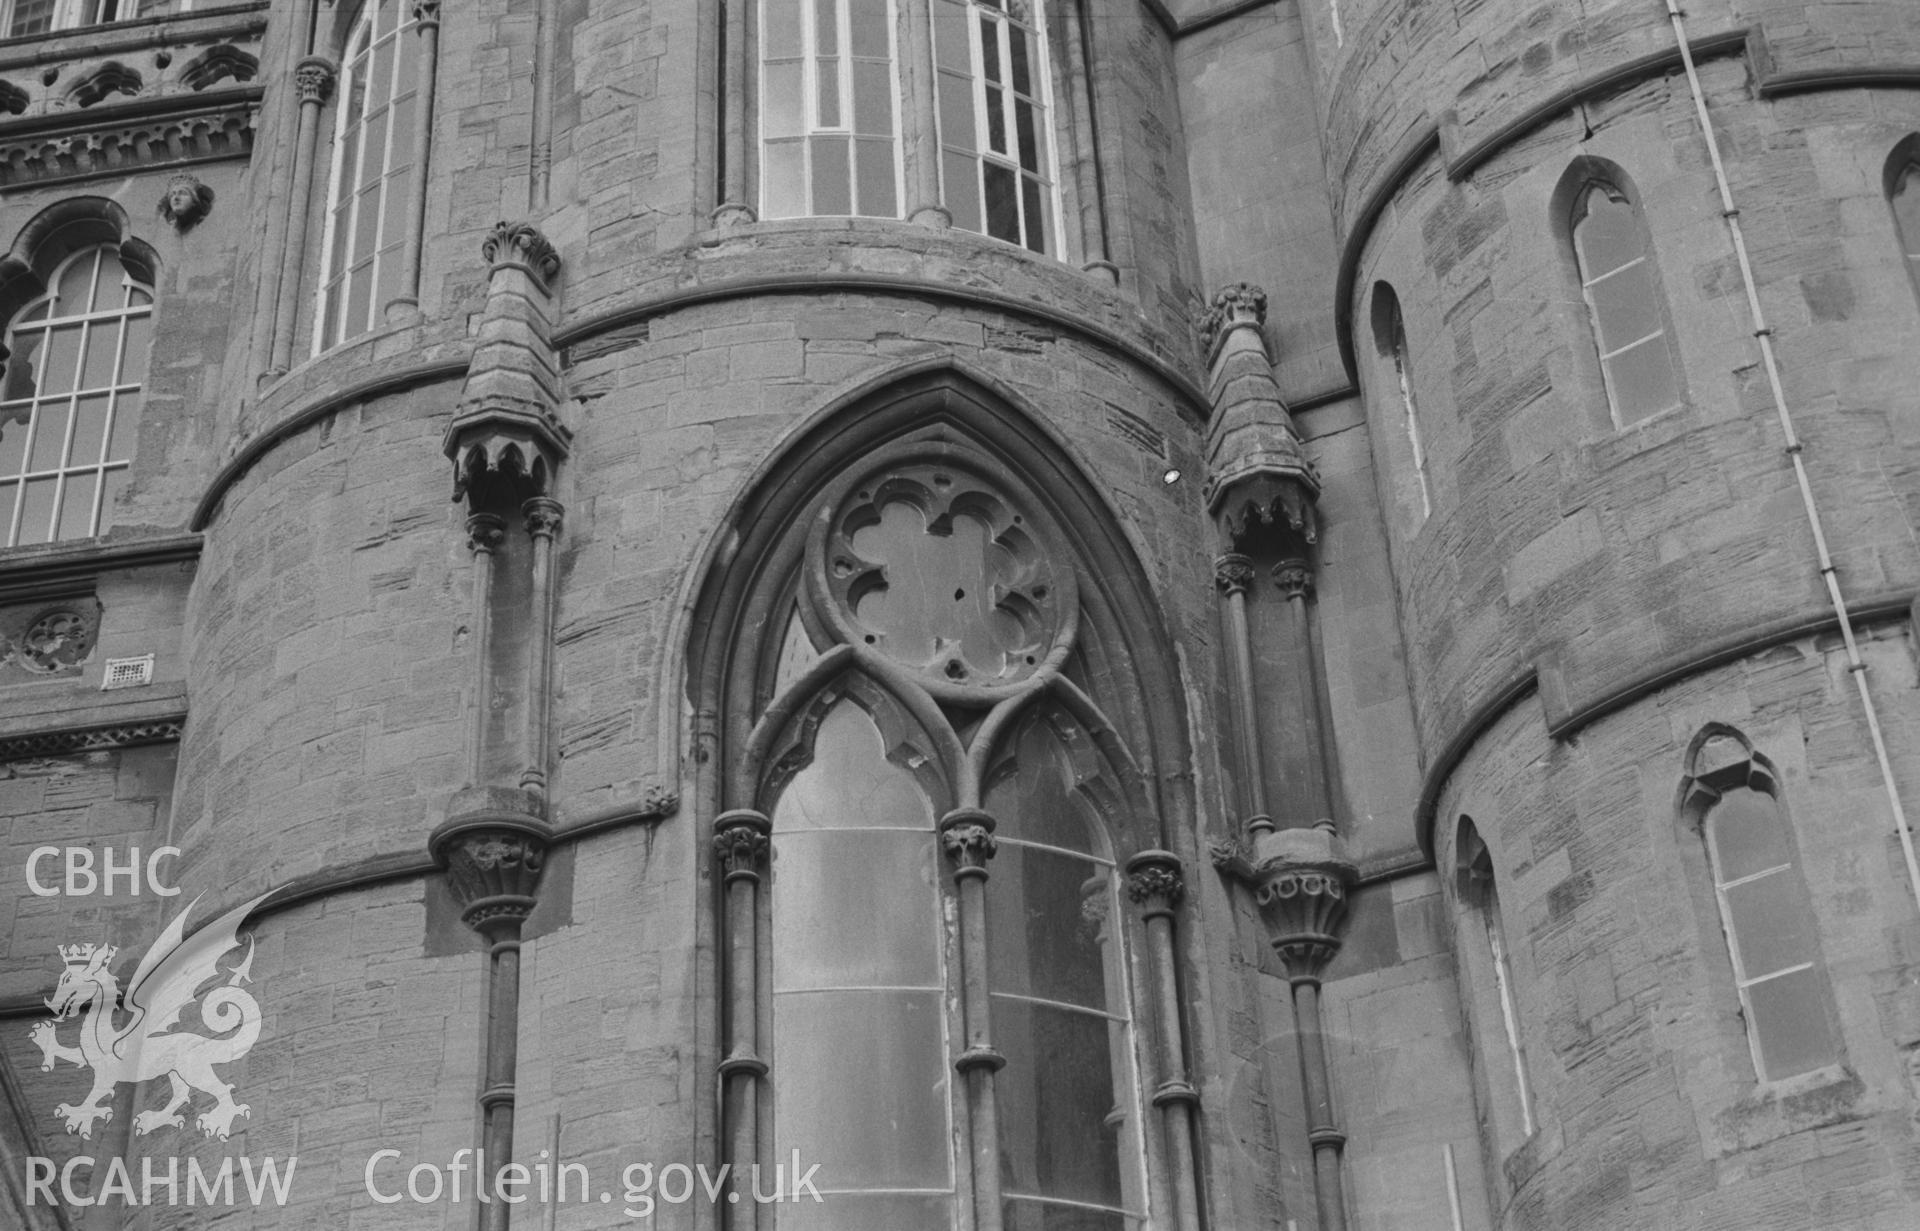 Digital copy of a black and white negative showing view looking up at windows to the right of the main entrance of Old College, Aberystwyth. Photographed by Arthur O. Chater on 13th April 1967 looking north west from Grid Reference SN 581 817.